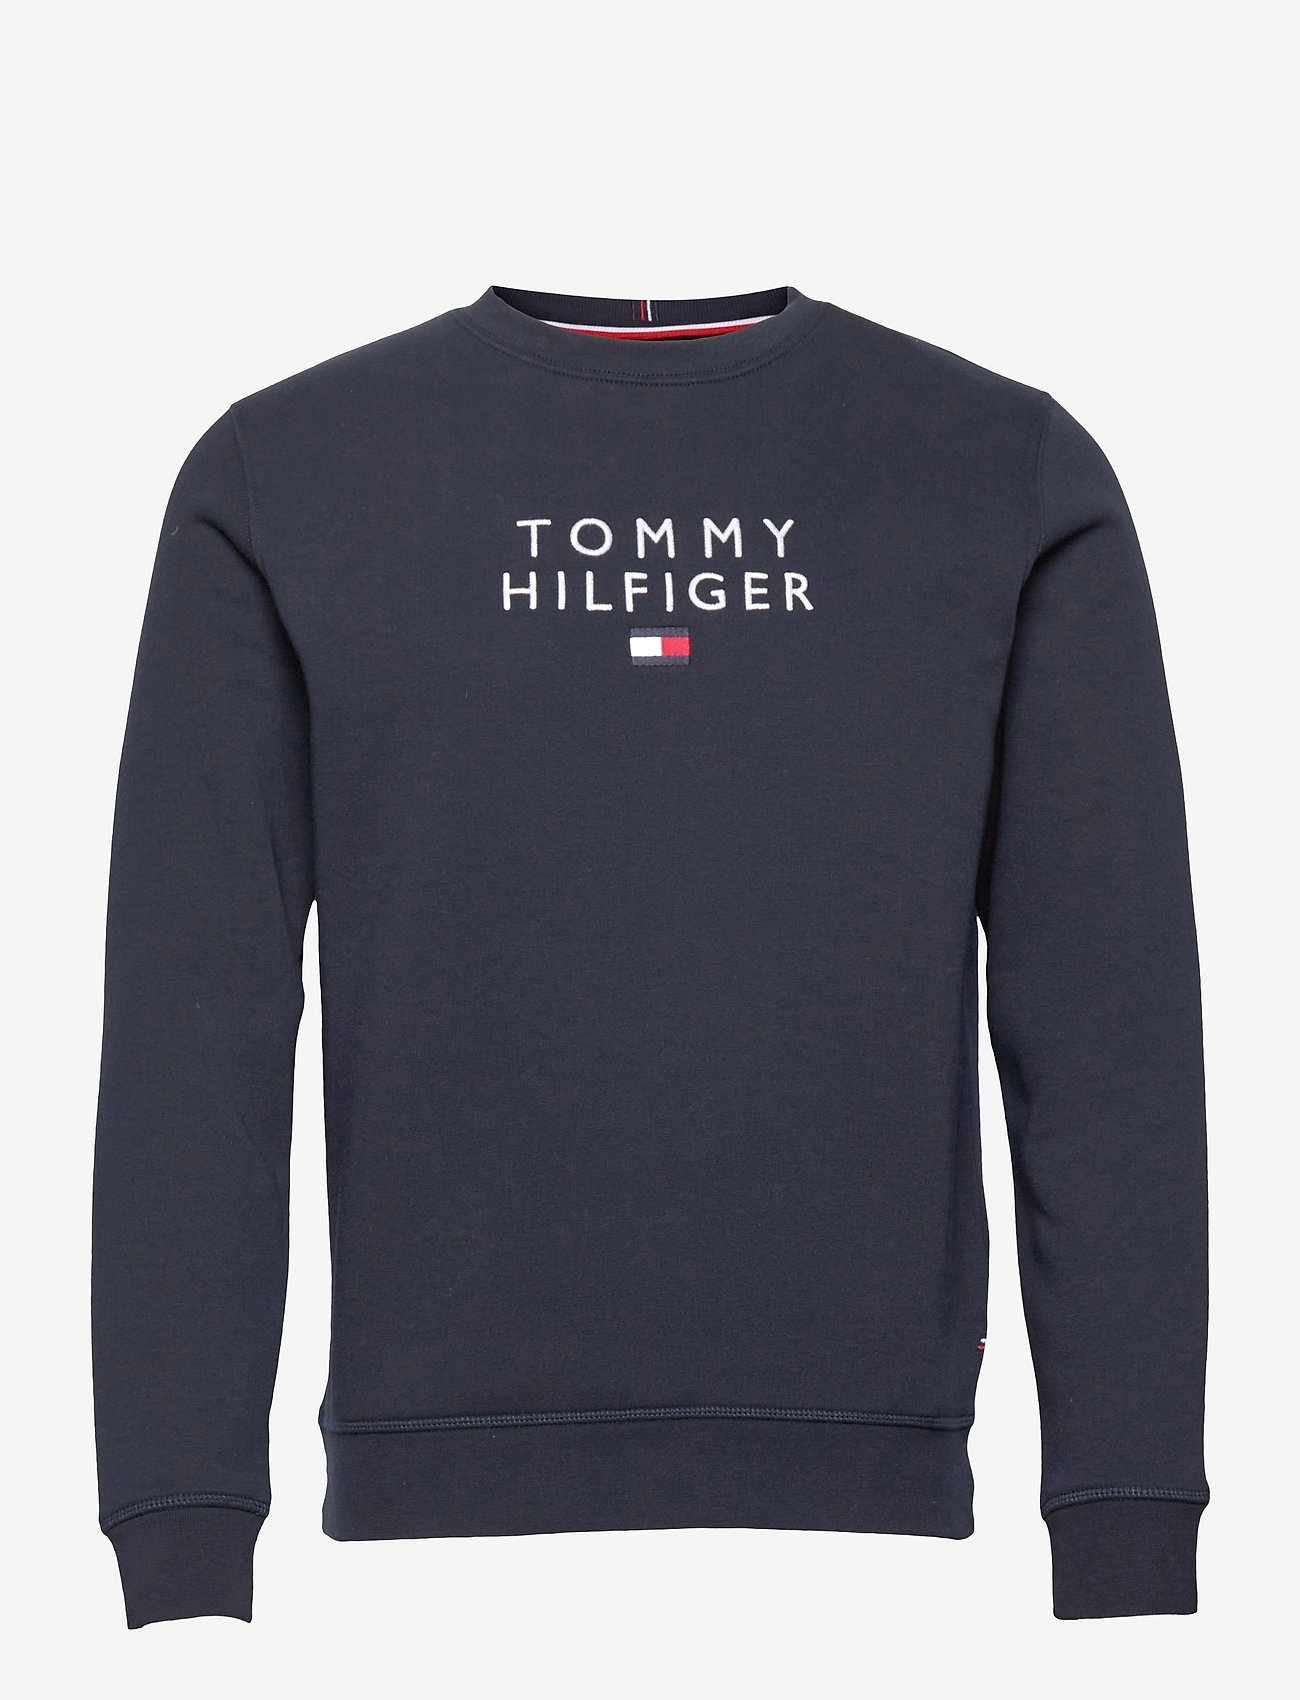 Tommy Flag Top Sellers, 41% OFF | www.ilpungolo.org